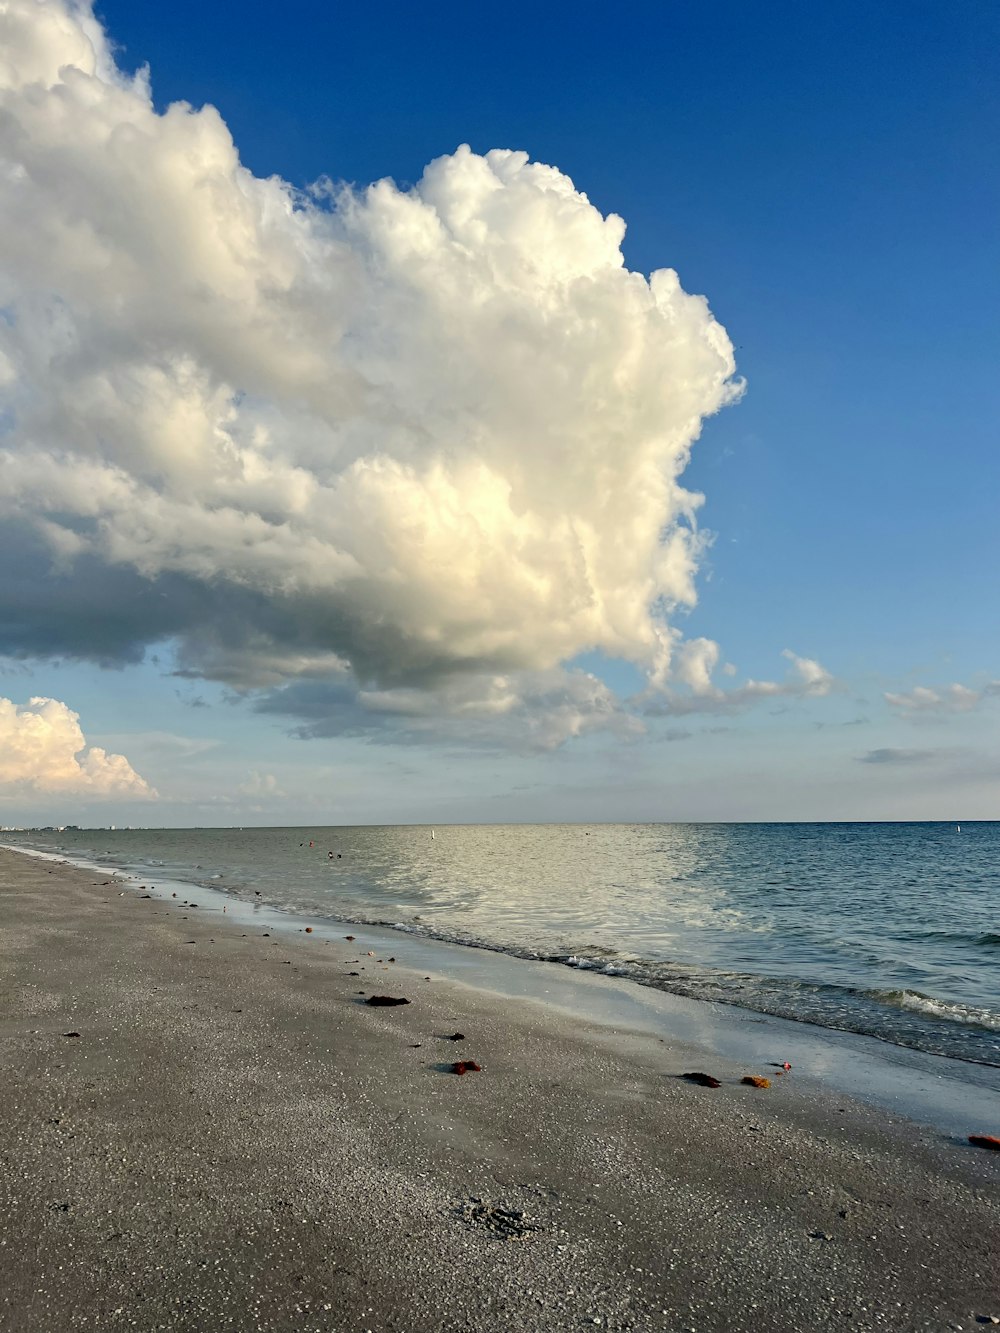 a cloudy sky over the ocean with a beach in the foreground